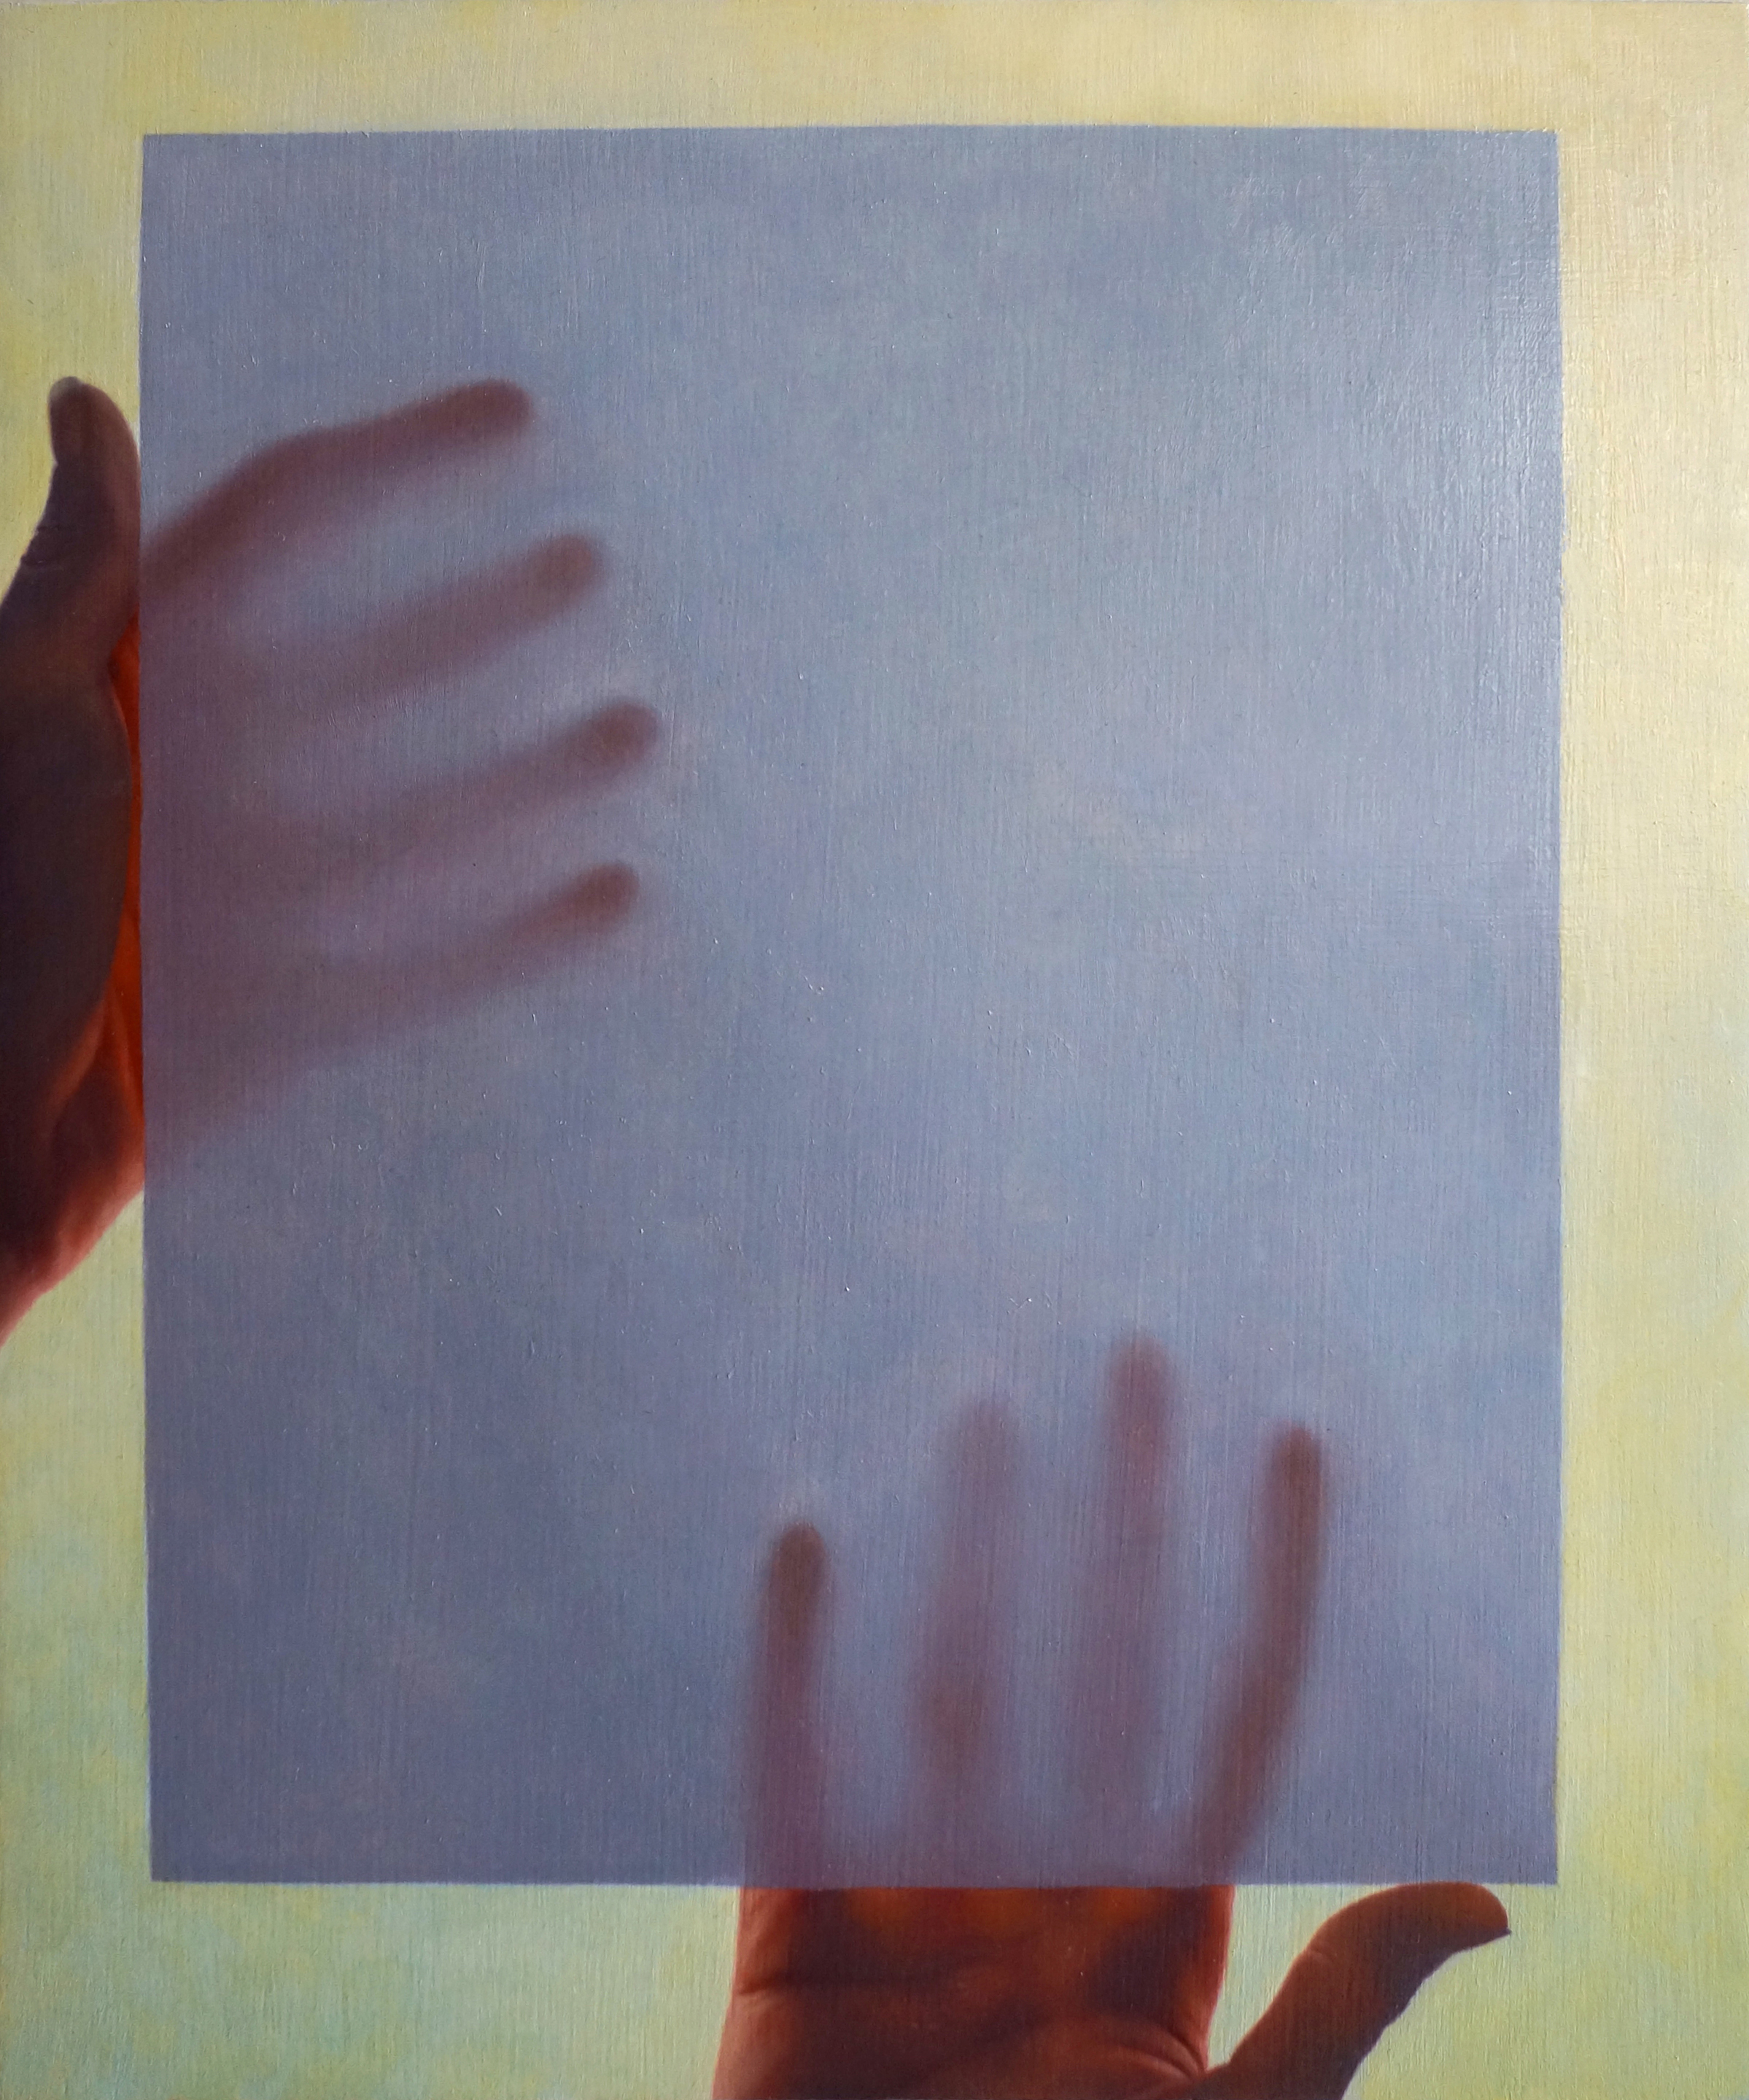   {paper with sun, hands} , oil on panel, 10" x 12" 